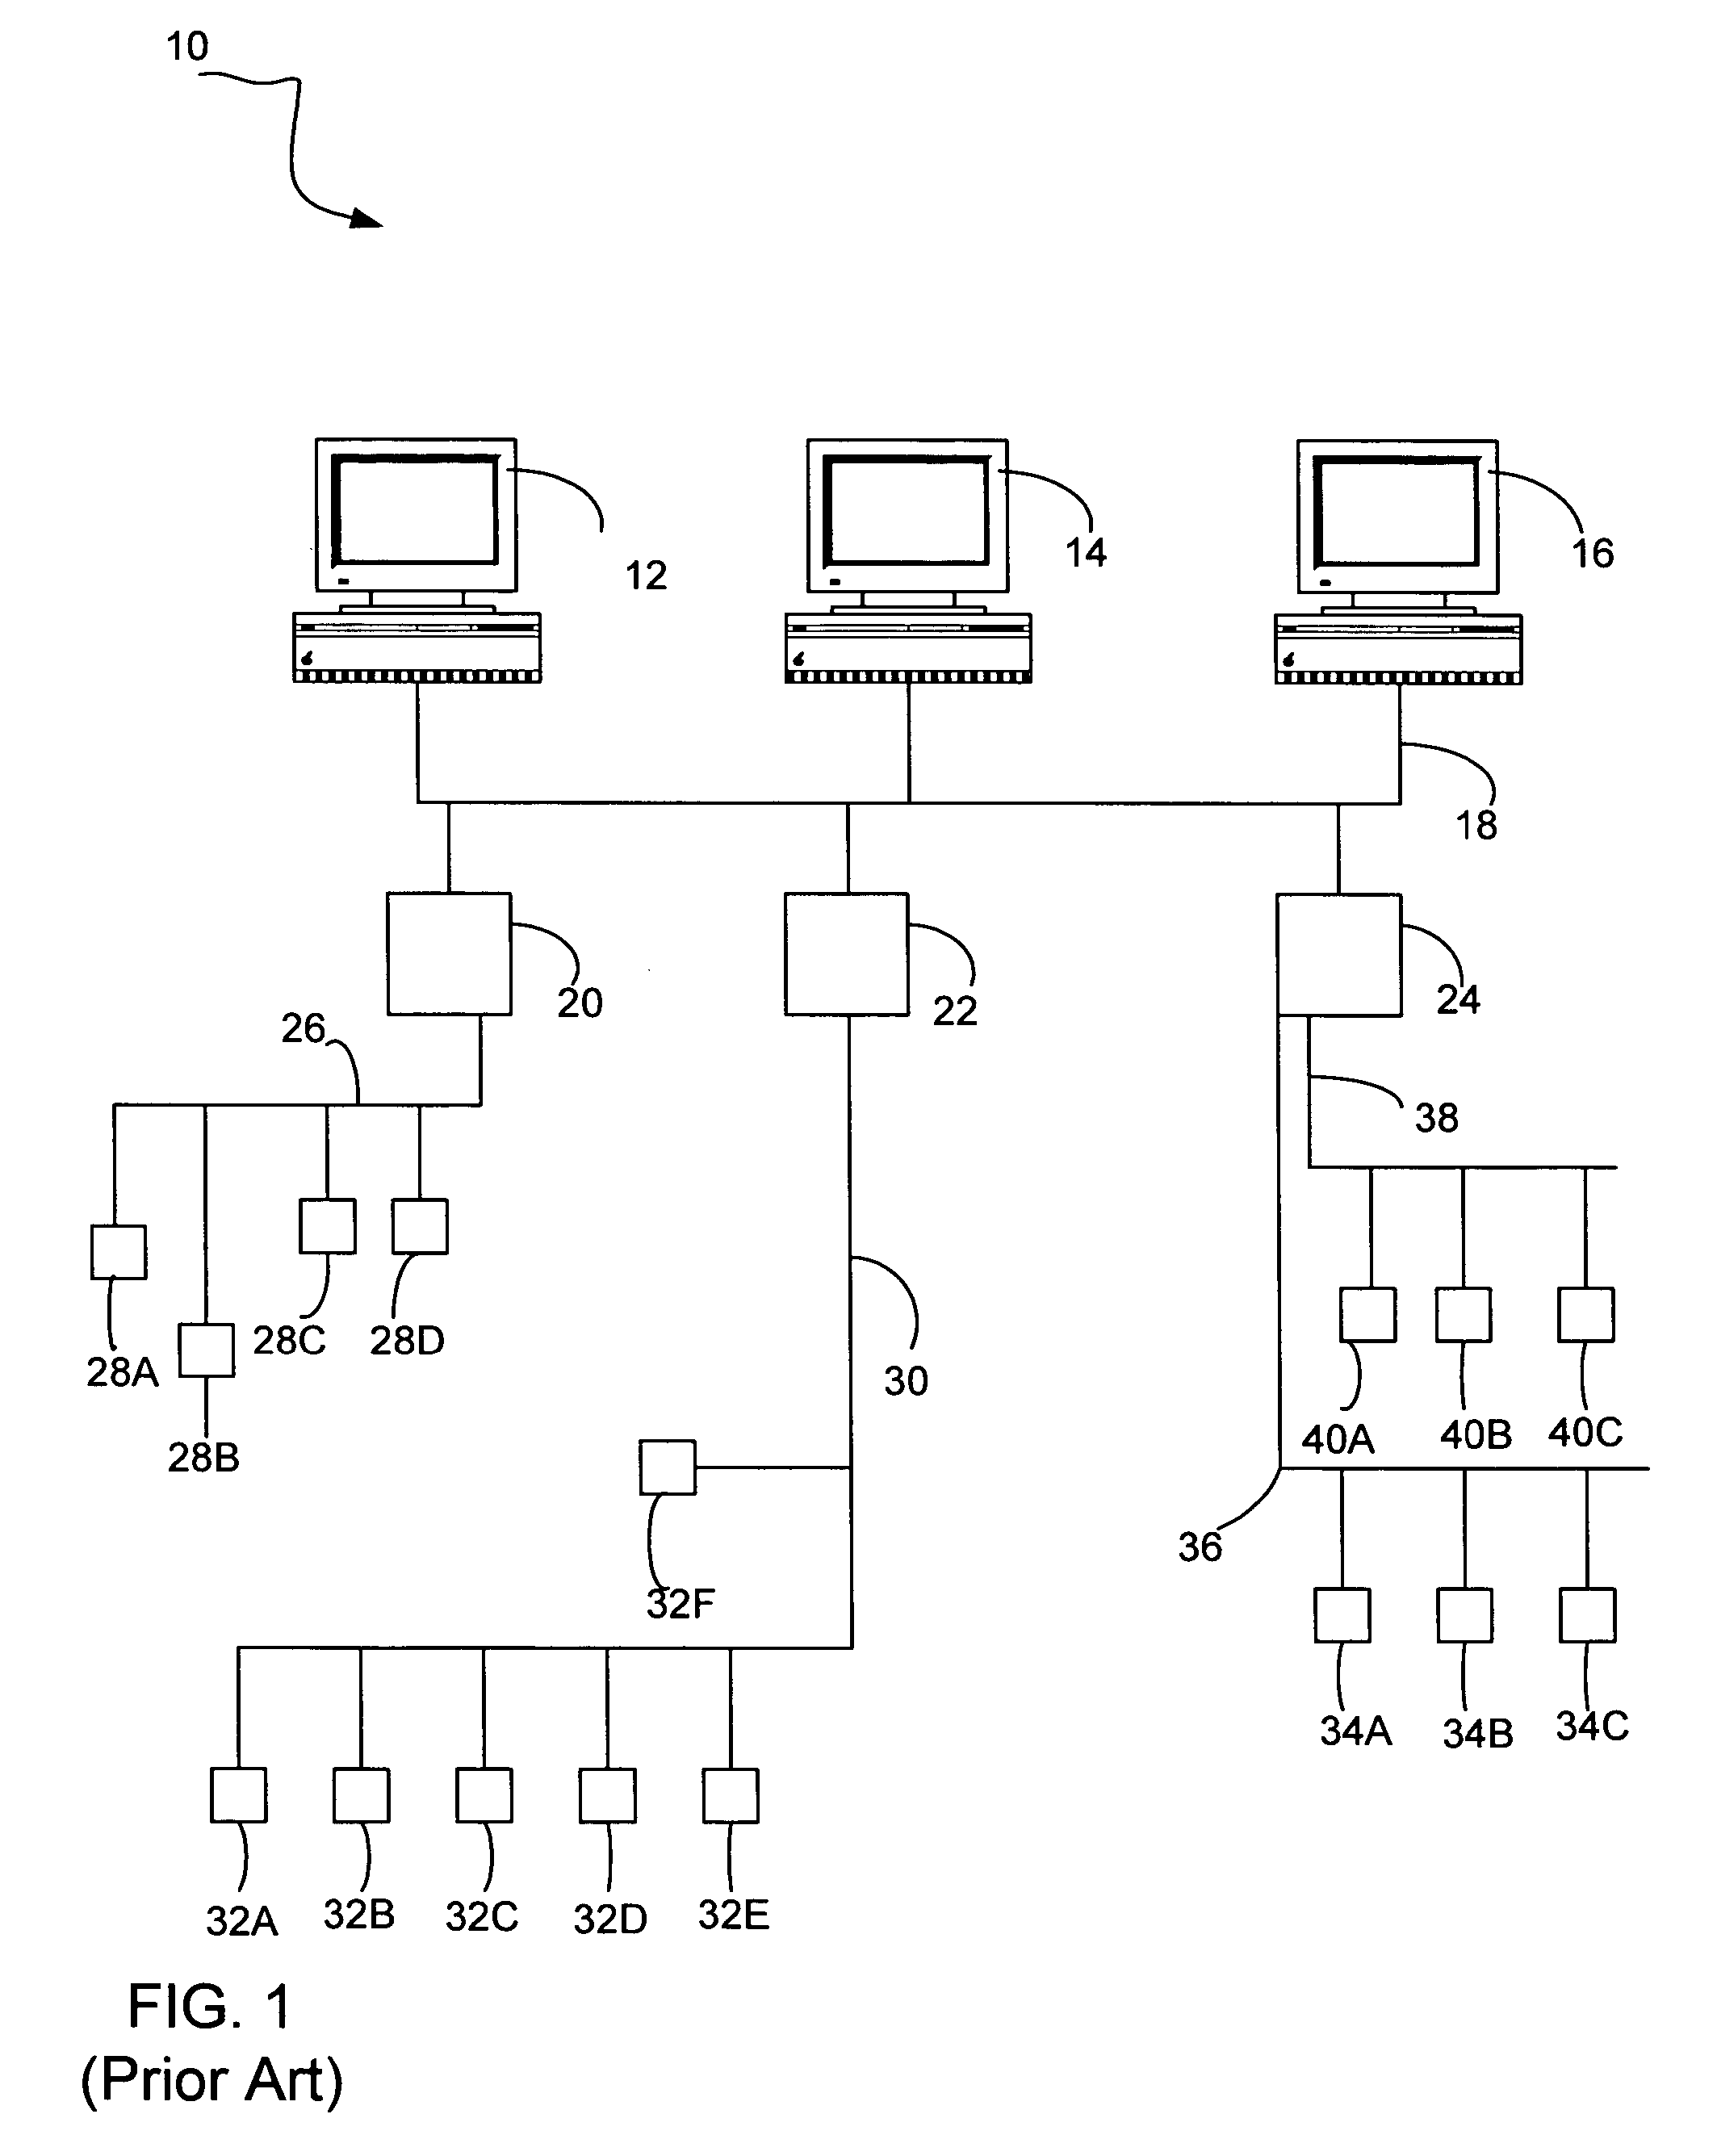 Field-based asset management device and architecture